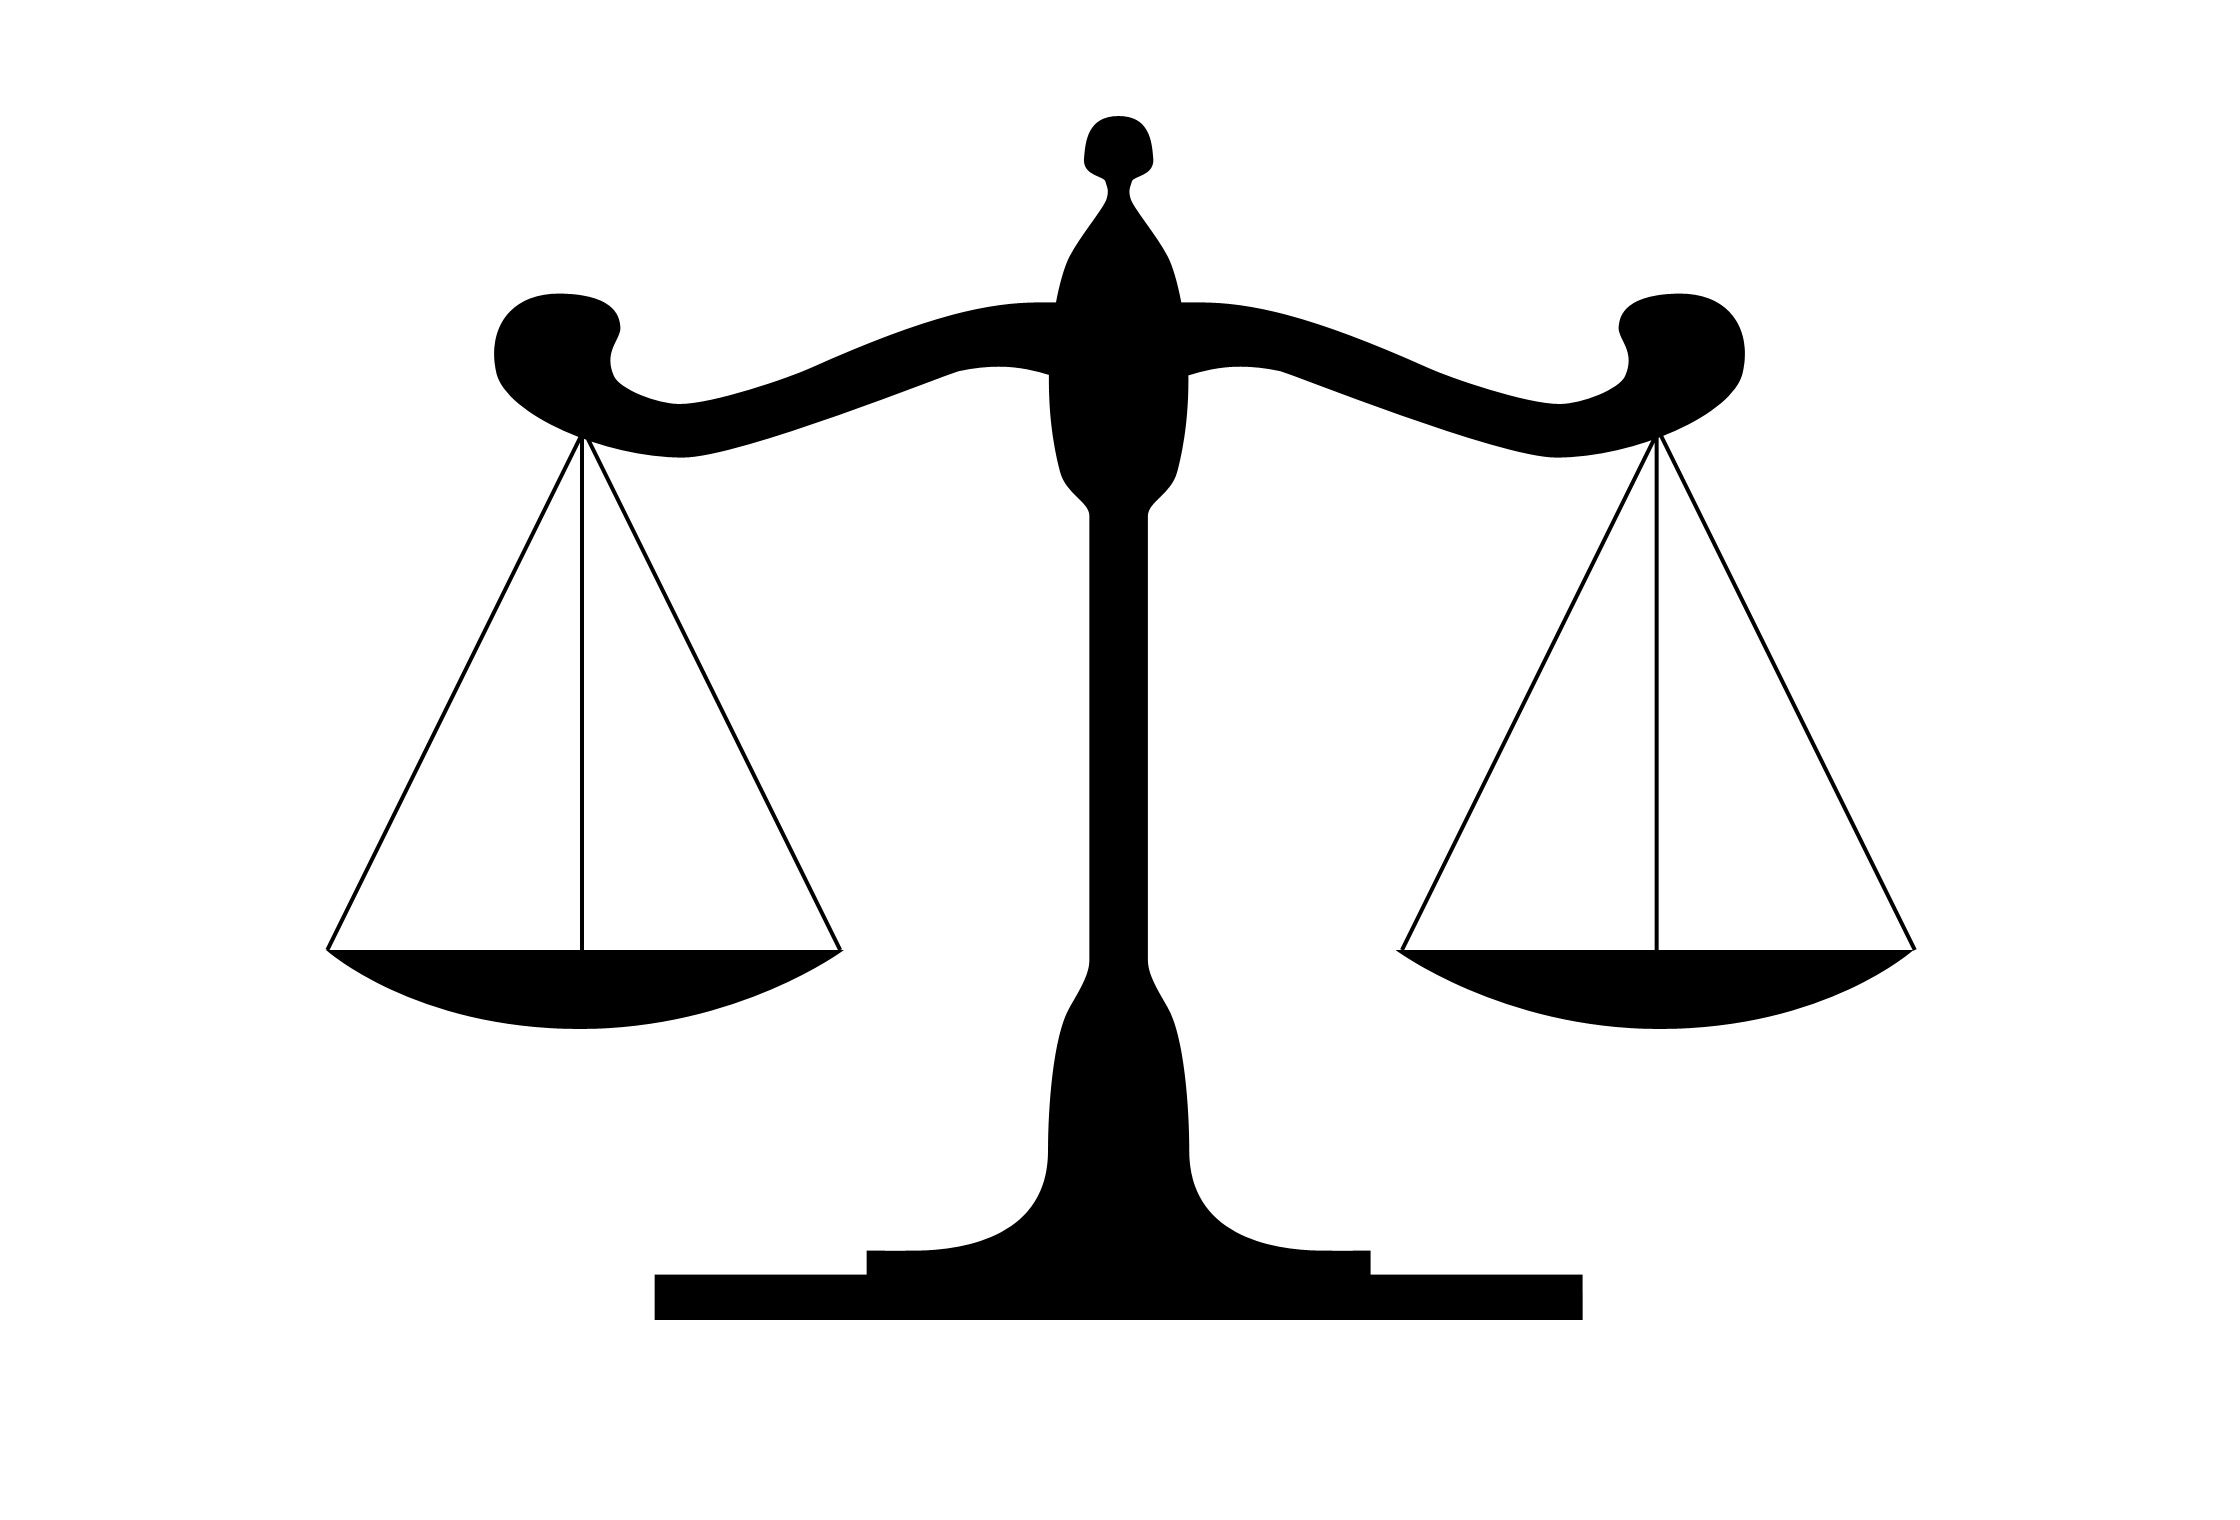 Scale Of Justice Logo - ClipArt Best